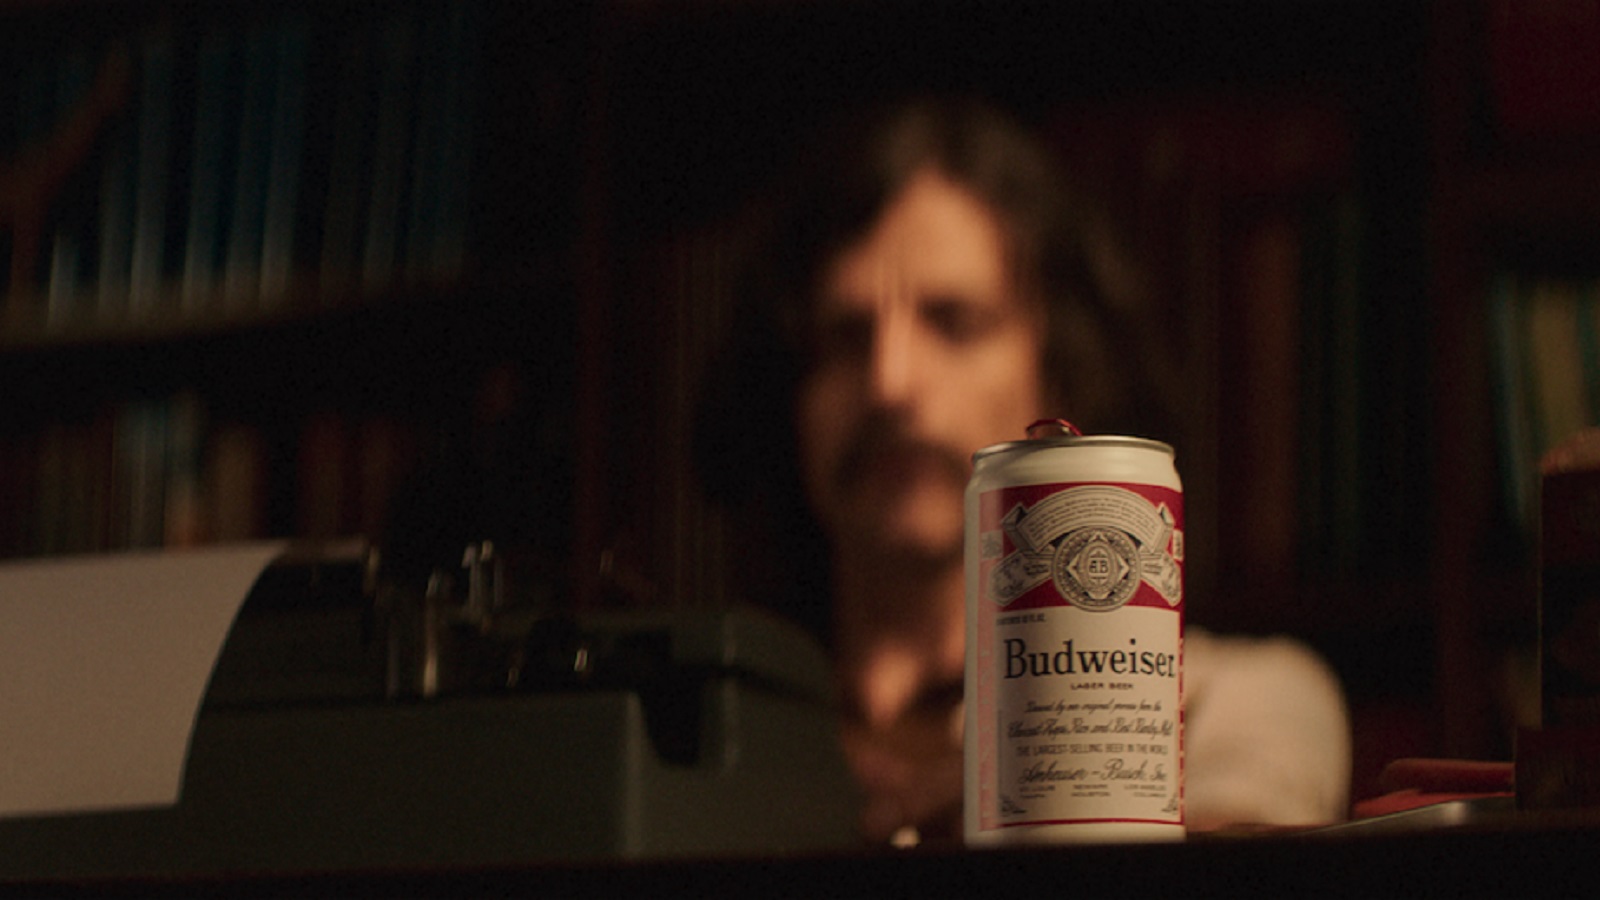 This Year’s Halloween Was All About Nostalgia for Budweiser